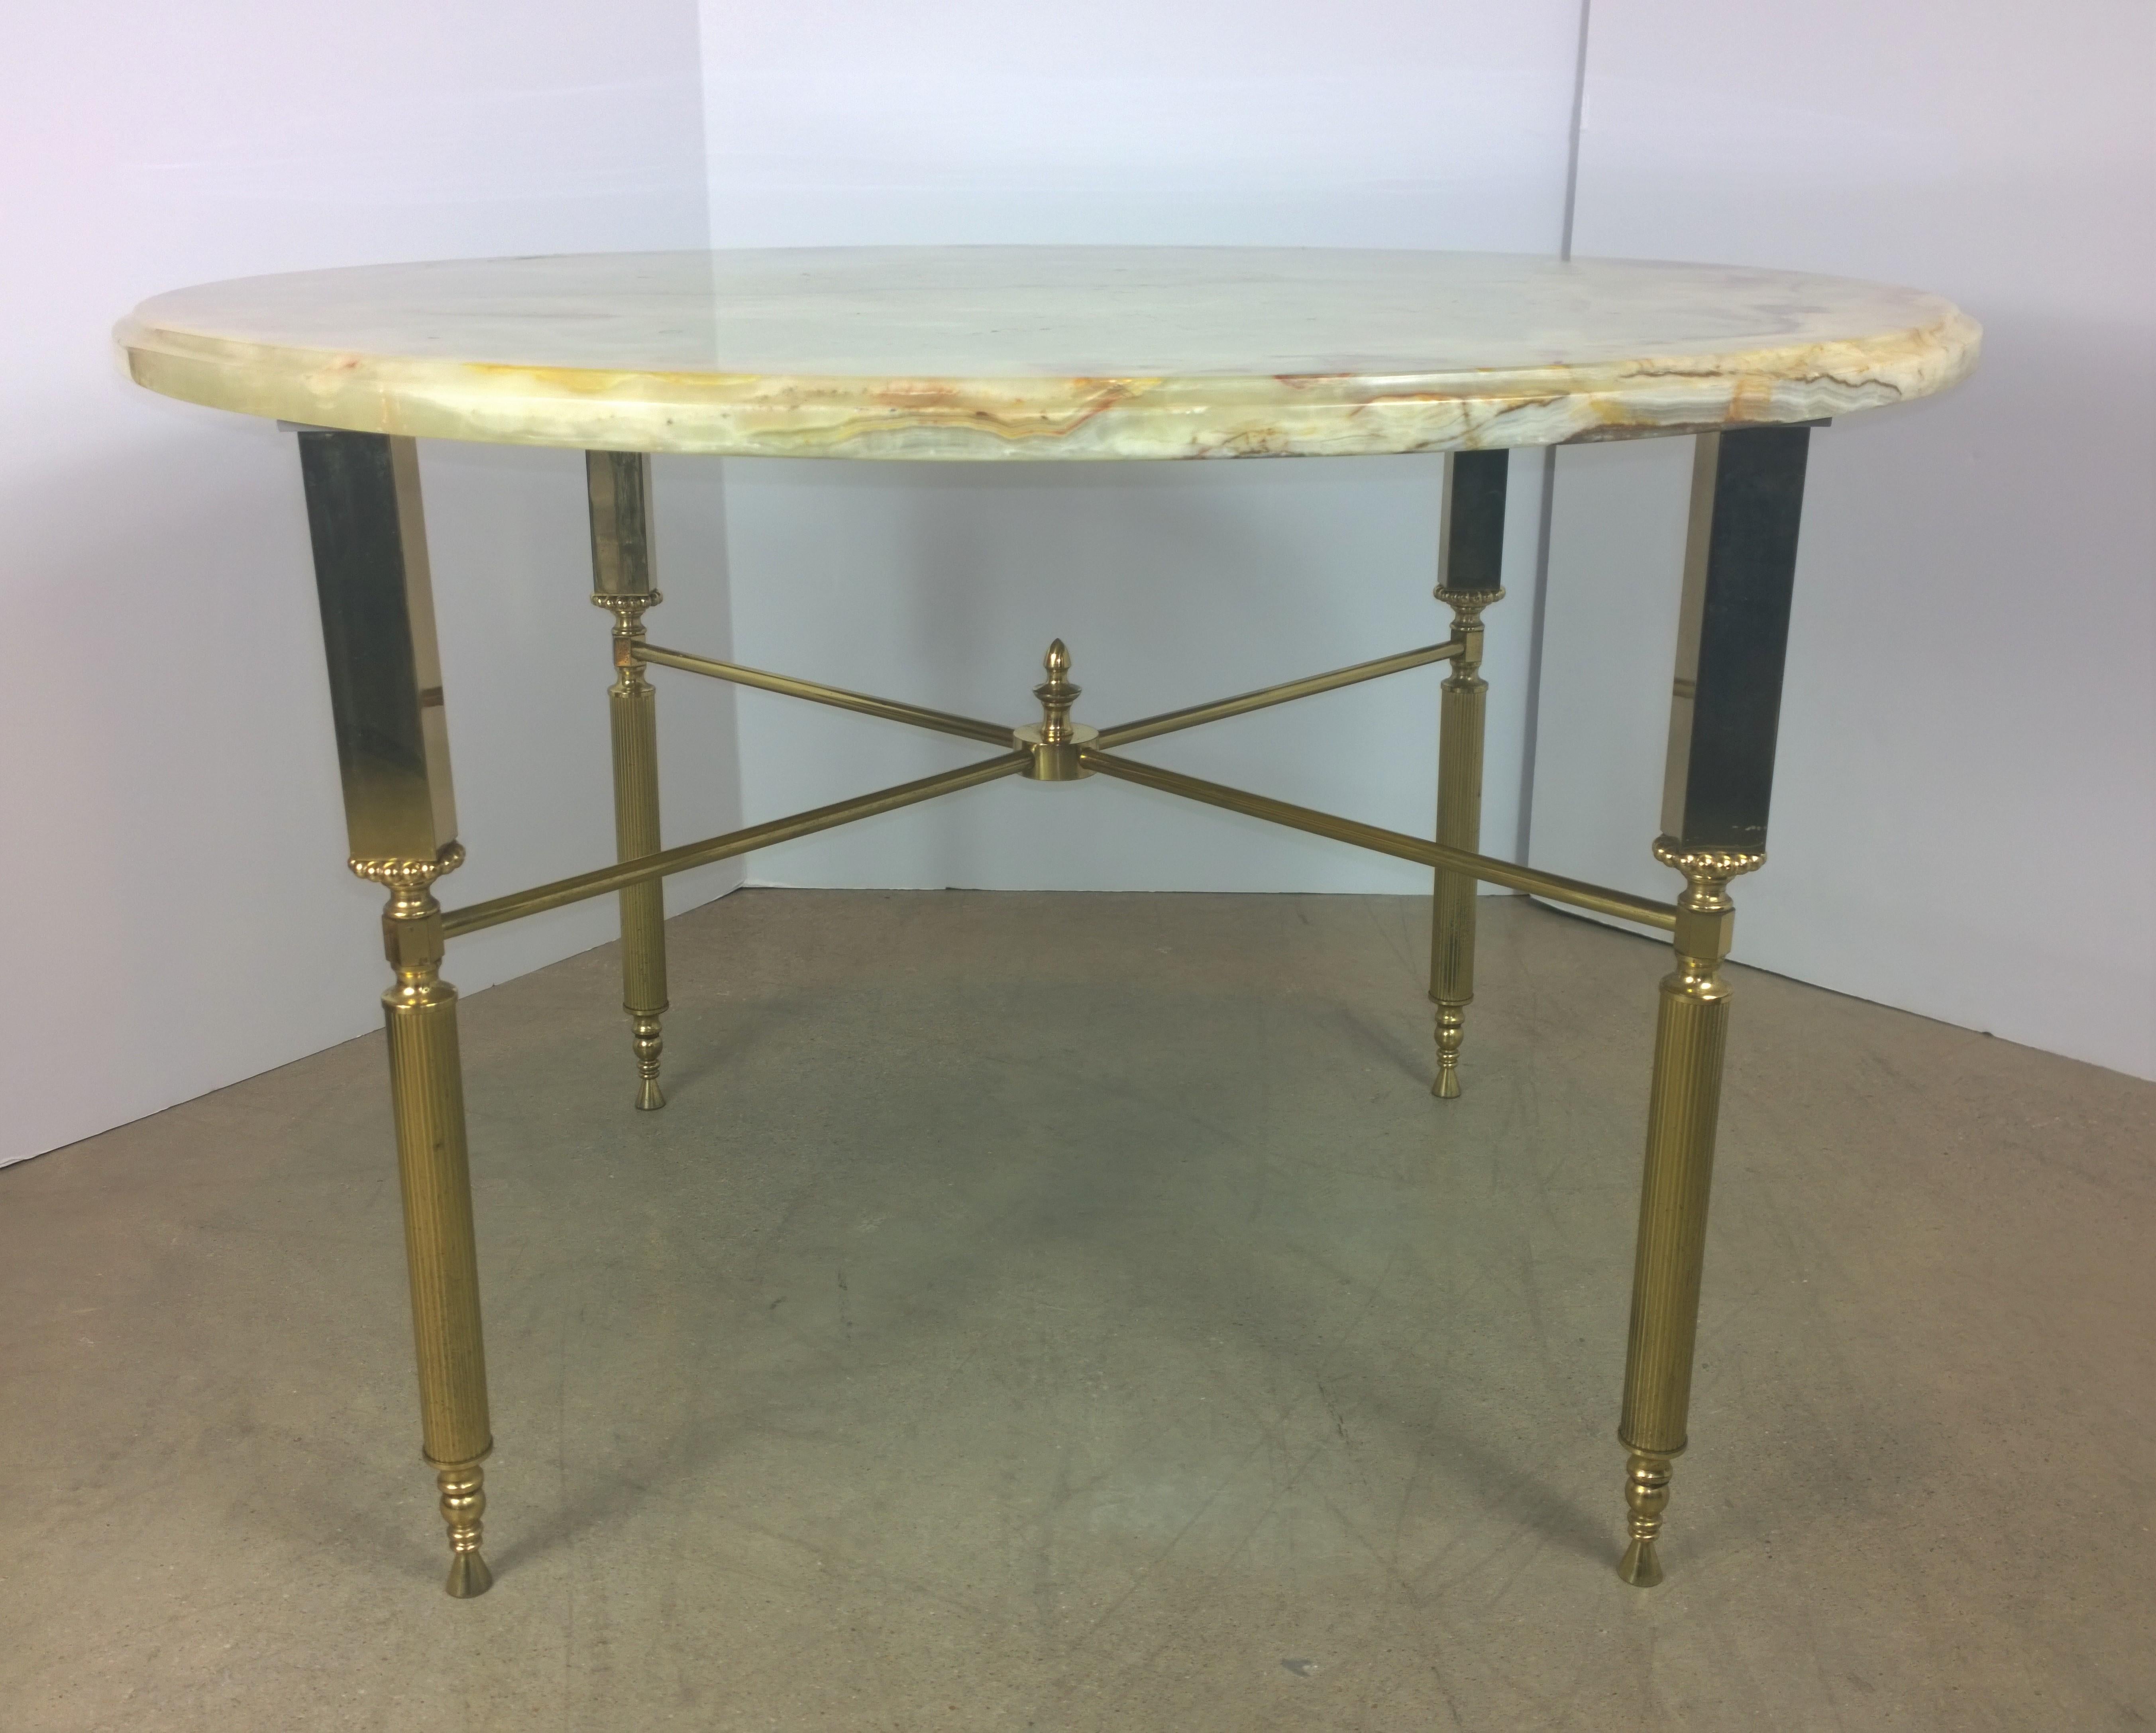 Offered is a midcentury neoclassical gorgeous yellow, orange and red onyx with a brass frame side or small cocktail/coffee table attributed to the Buenos Aires workshops of Maison Jansen. Exuding restrained elegance, this piece would look fabulous